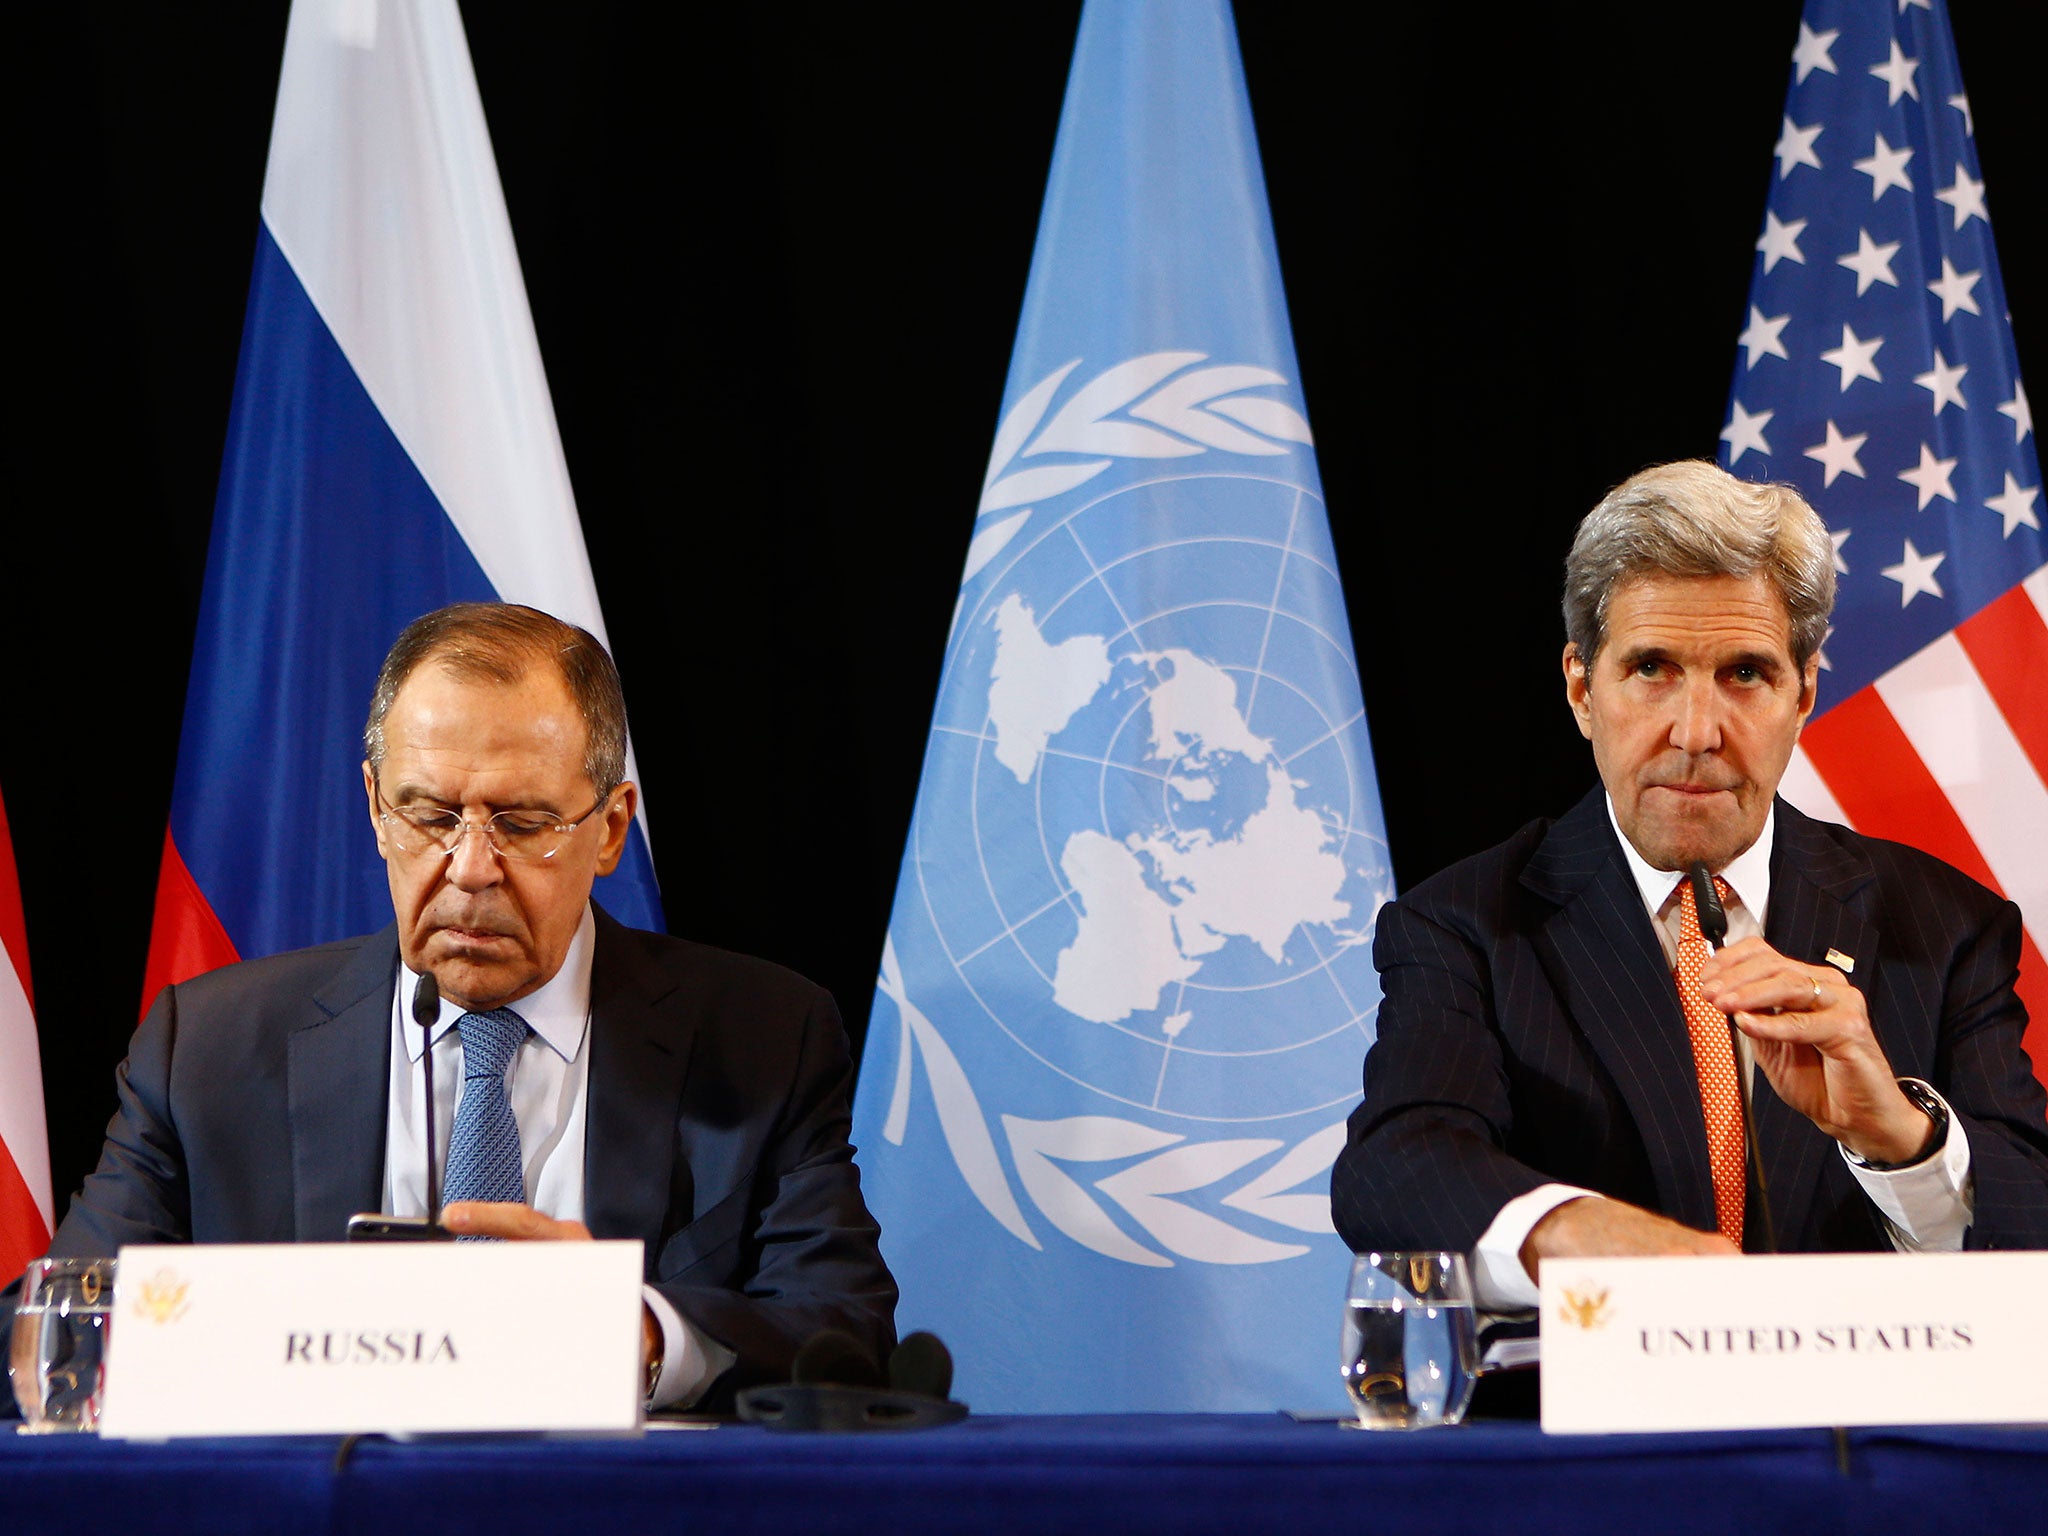 US Secretary of State John Kerry (right) and Russian Foreign Minister Sergey Lavrov announce the planned Syrian ceasefire in Munich